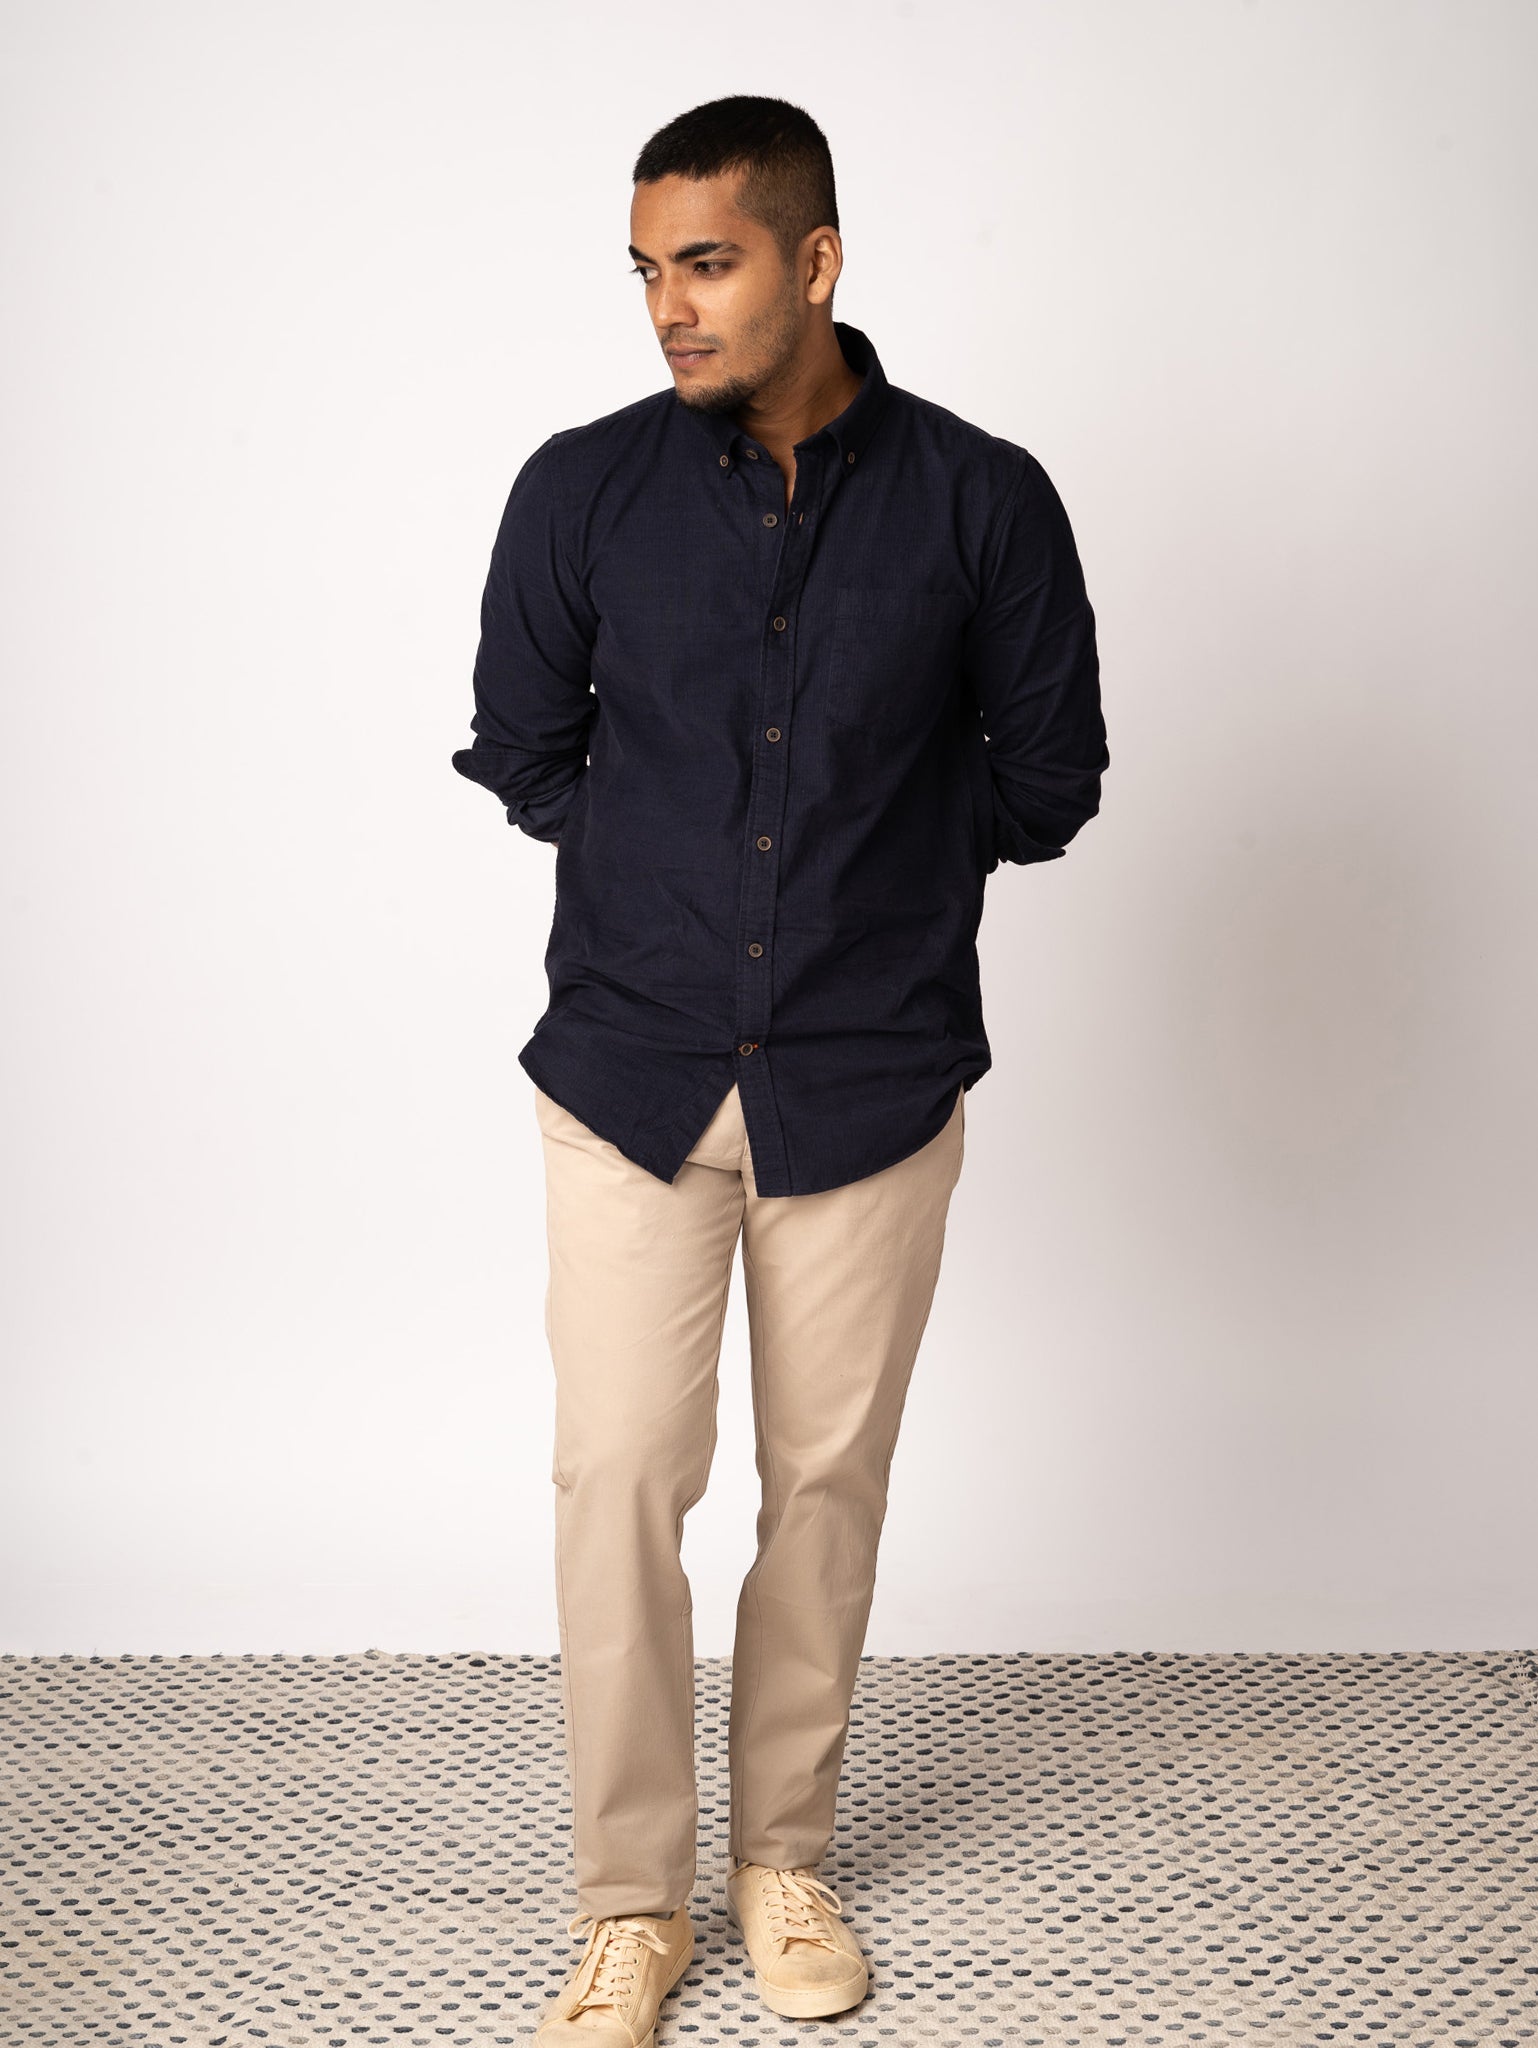 Bare Brown Corduroy Cotton Shirt, Slim Fit with Full Sleeves - Navy